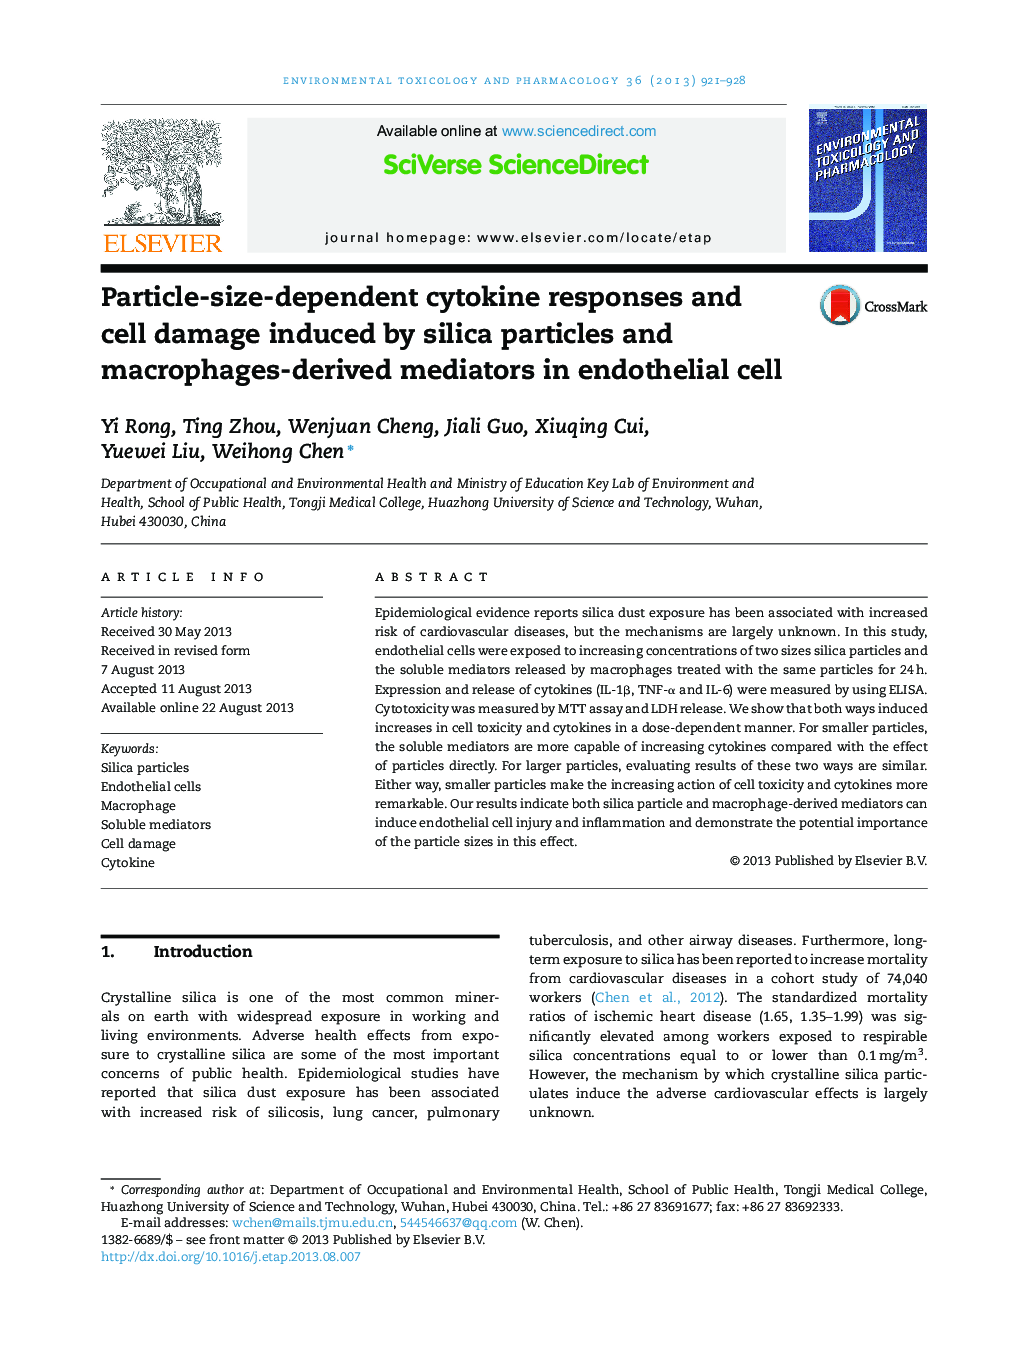 Particle-size-dependent cytokine responses and cell damage induced by silica particles and macrophages-derived mediators in endothelial cell